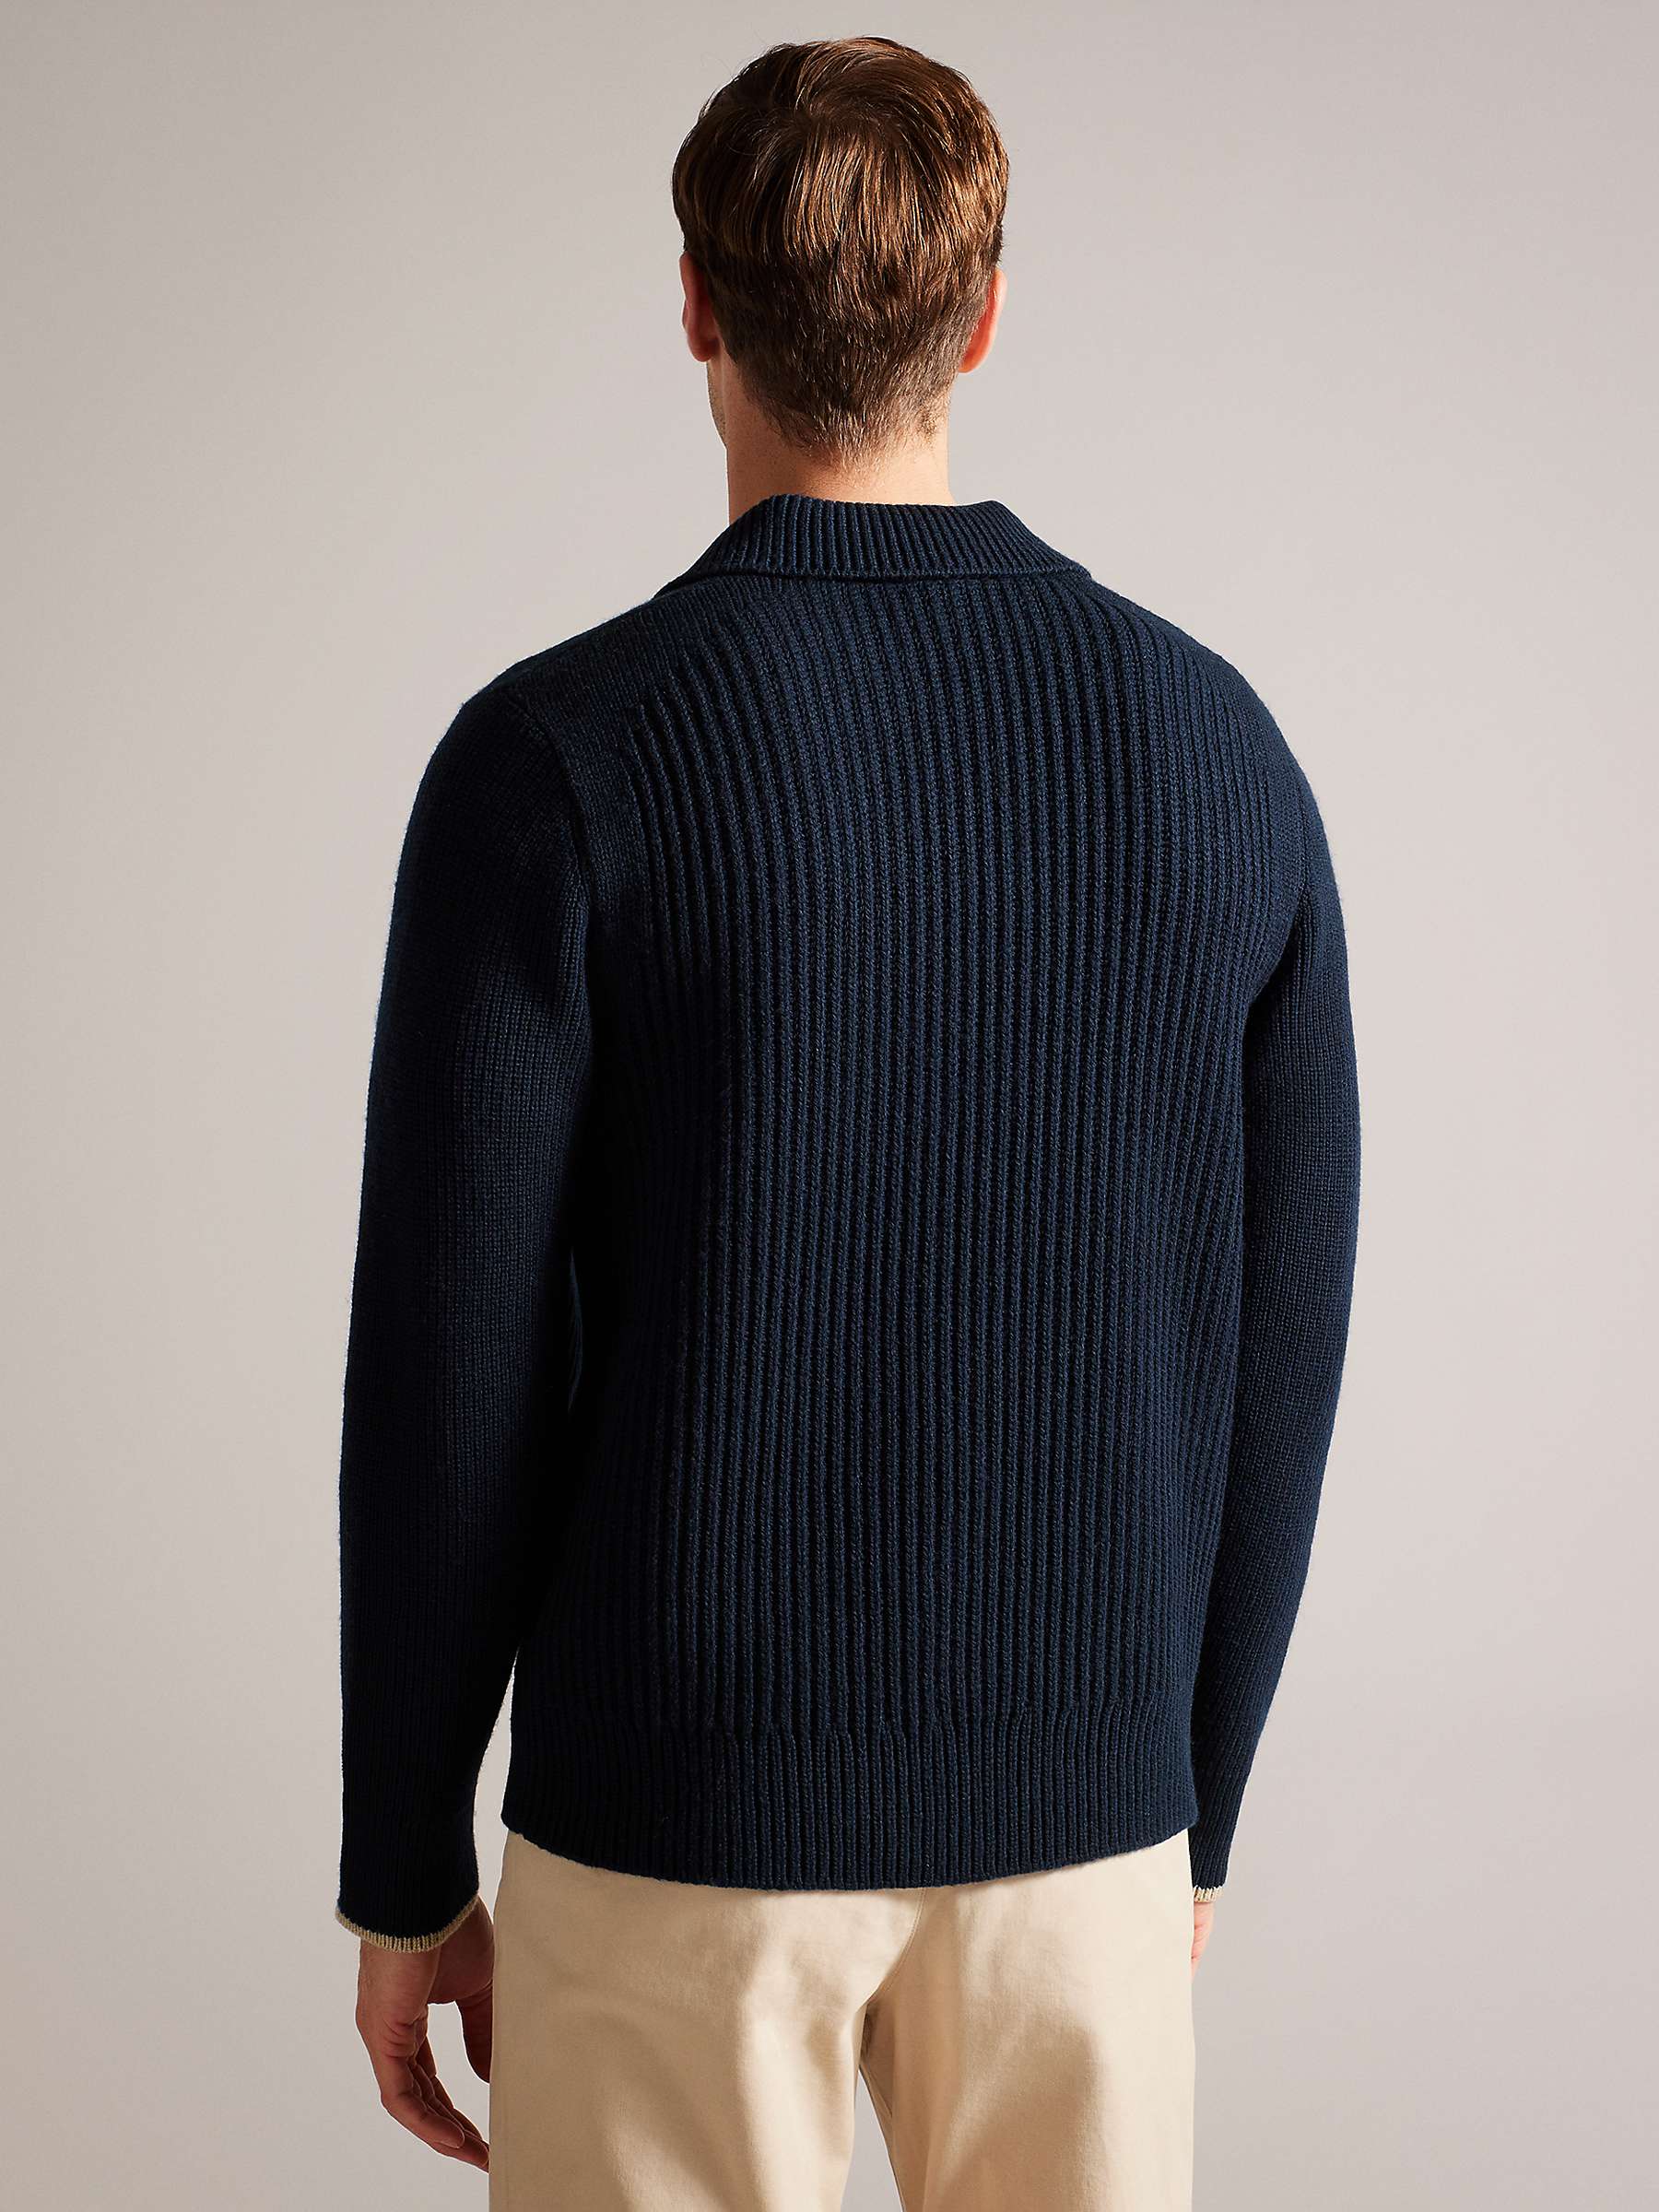 Buy Ted Baker Ademy Long Sleeve Open Neck Rib Polo Shirt Online at johnlewis.com